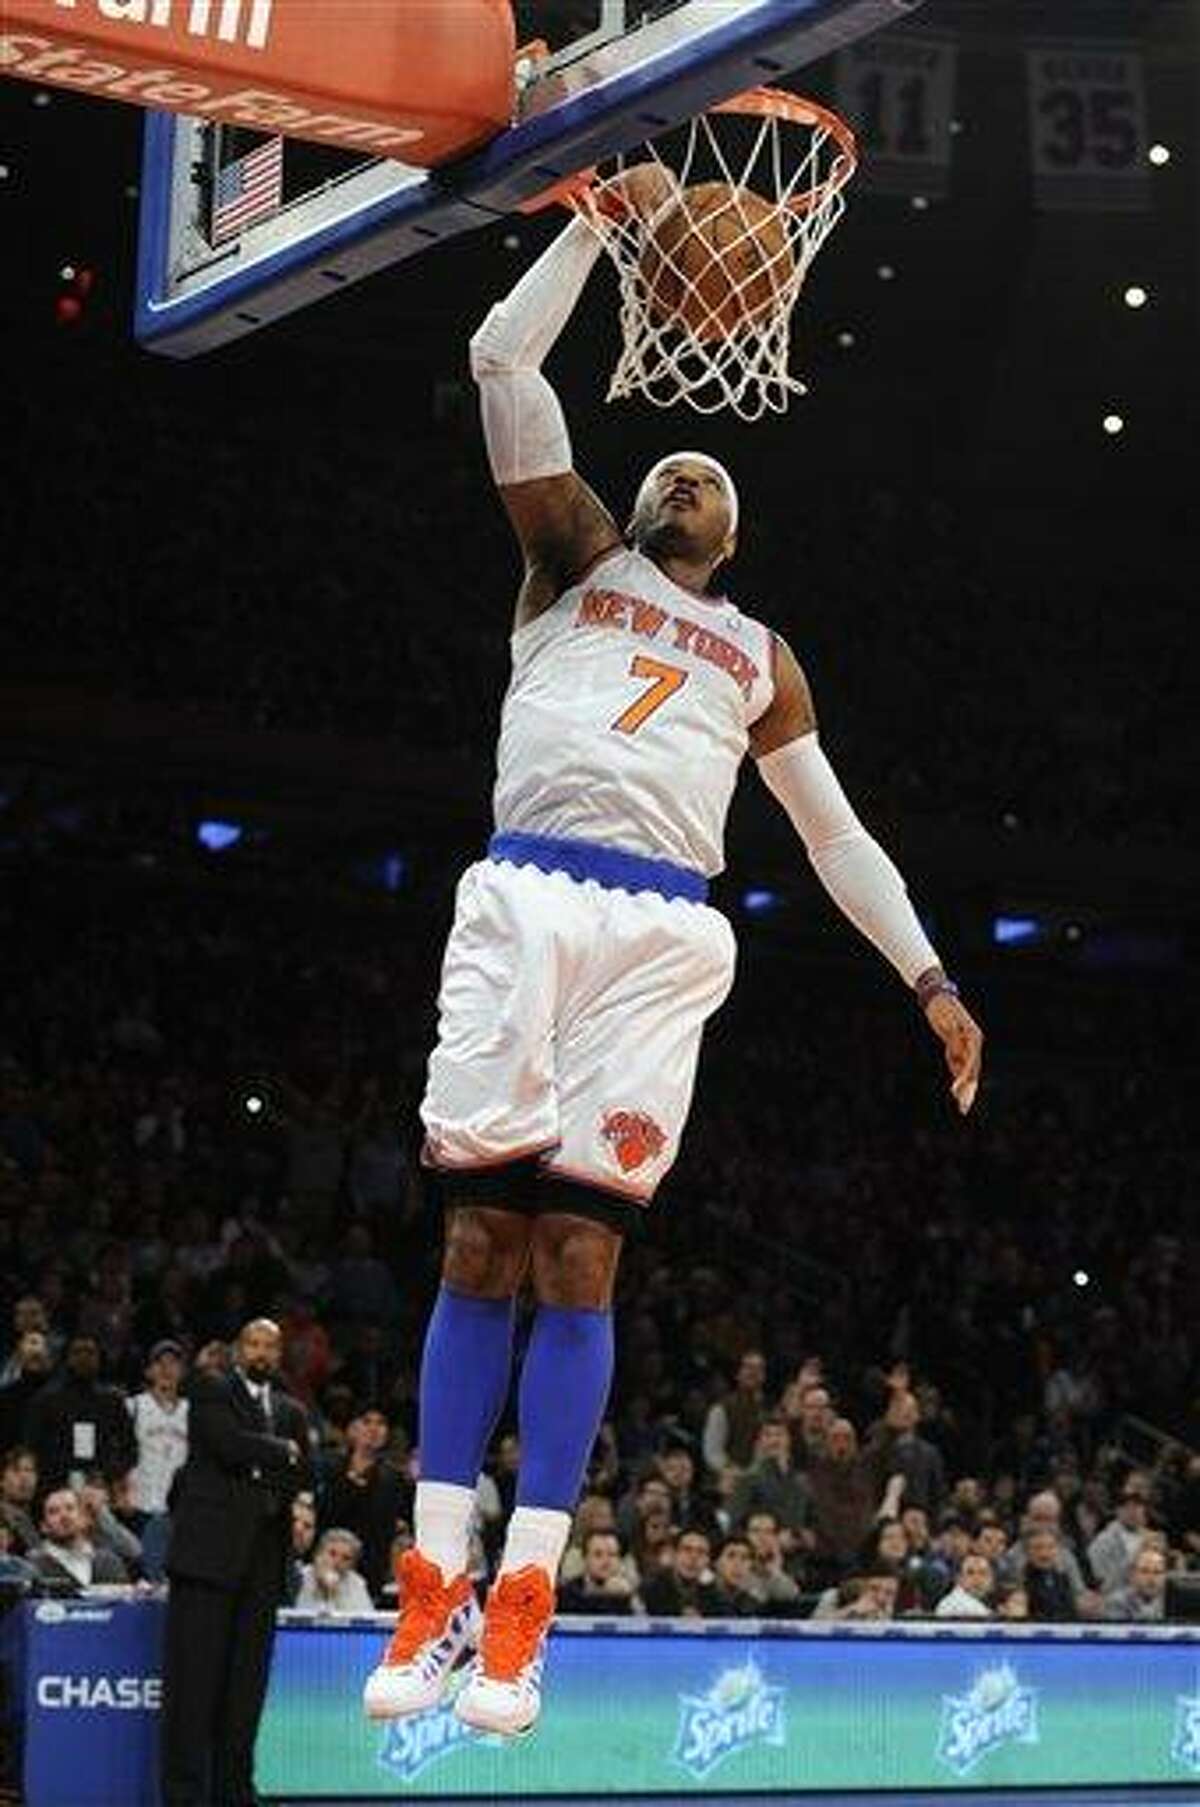 New York Knicks' Carmelo Anthony (7) dunks a basket against the Minnesota Timberwolves in the first half of an NBA basketball game on Sunday, Dec., 23, 2012, at Madison Square Garden in New York. (AP Photo/Kathy Kmonicek)